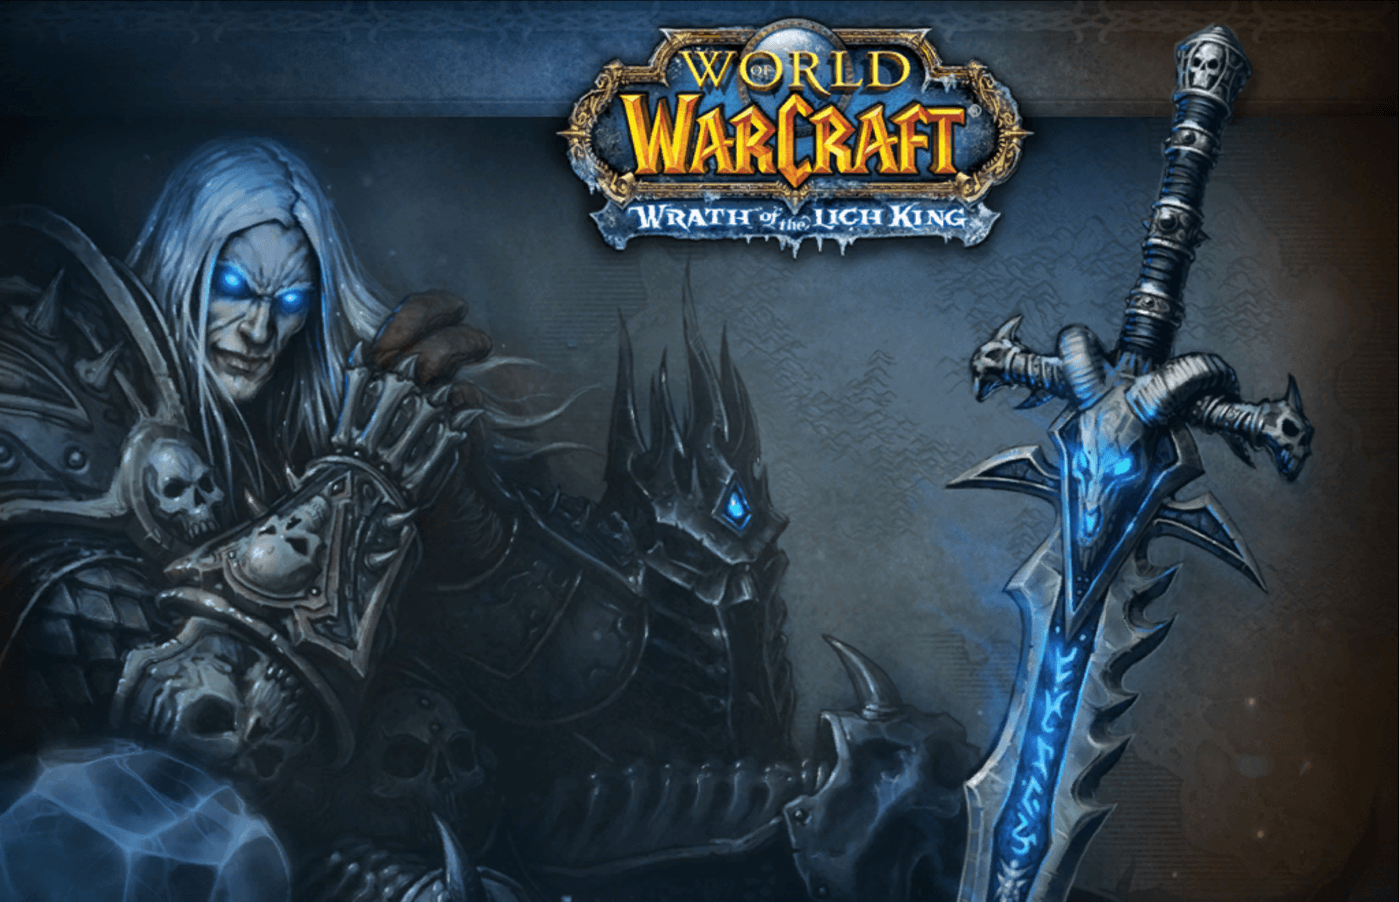 World of Warcraft:Wrath of the Lich King image wow lich king HD